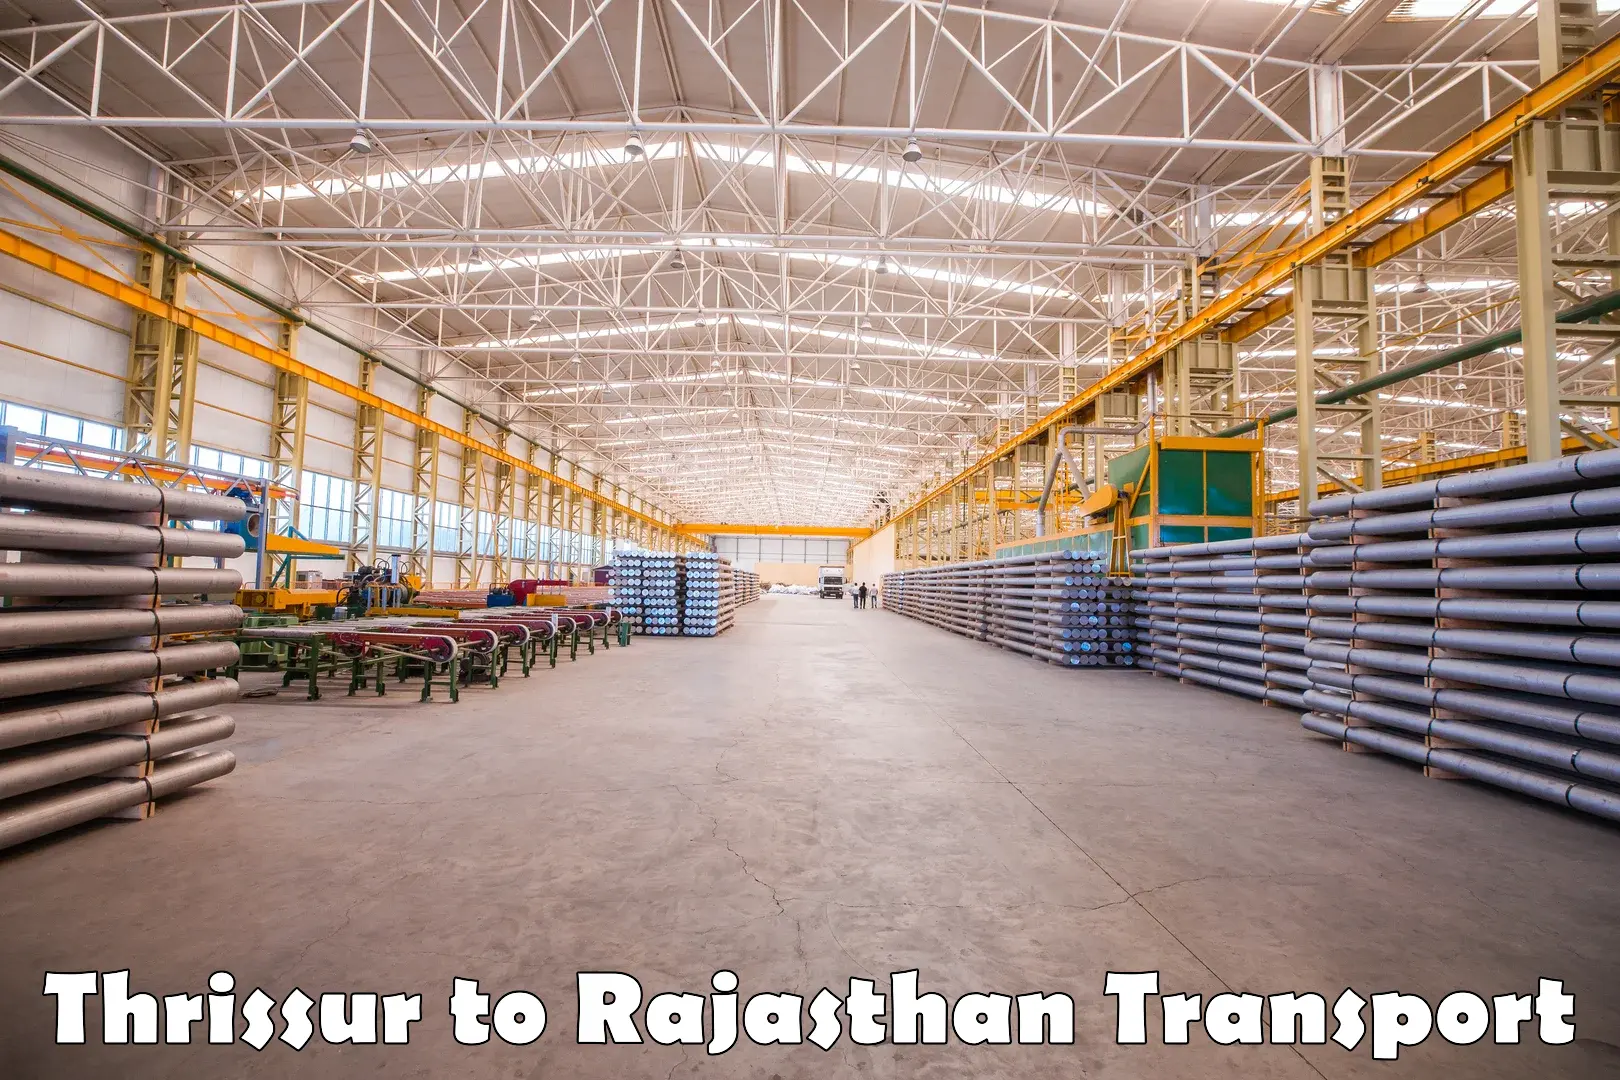 Express transport services Thrissur to Rajasthan